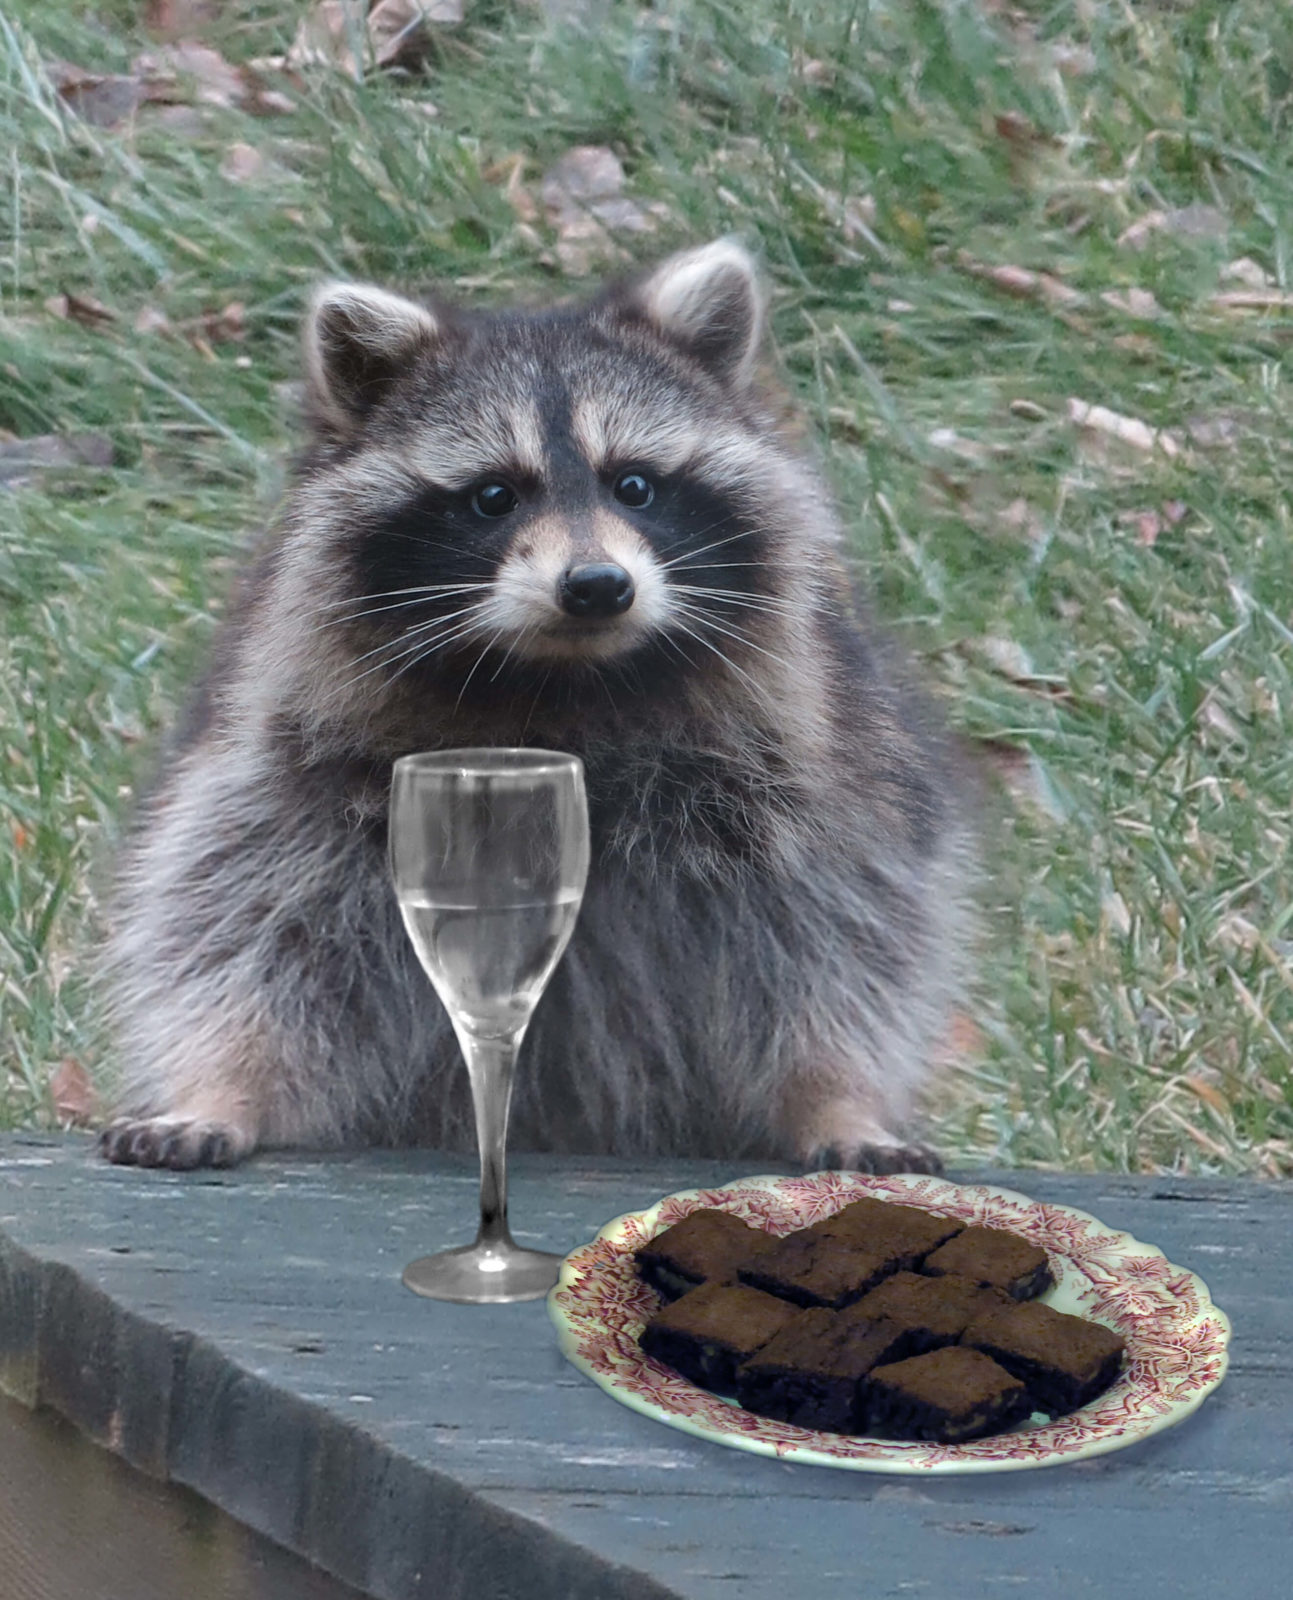 In Ithaca, New York, Robin Botie Photoshops brownies and a glass of wine in front of a raccoon that sits, waiting on the deck of her home.